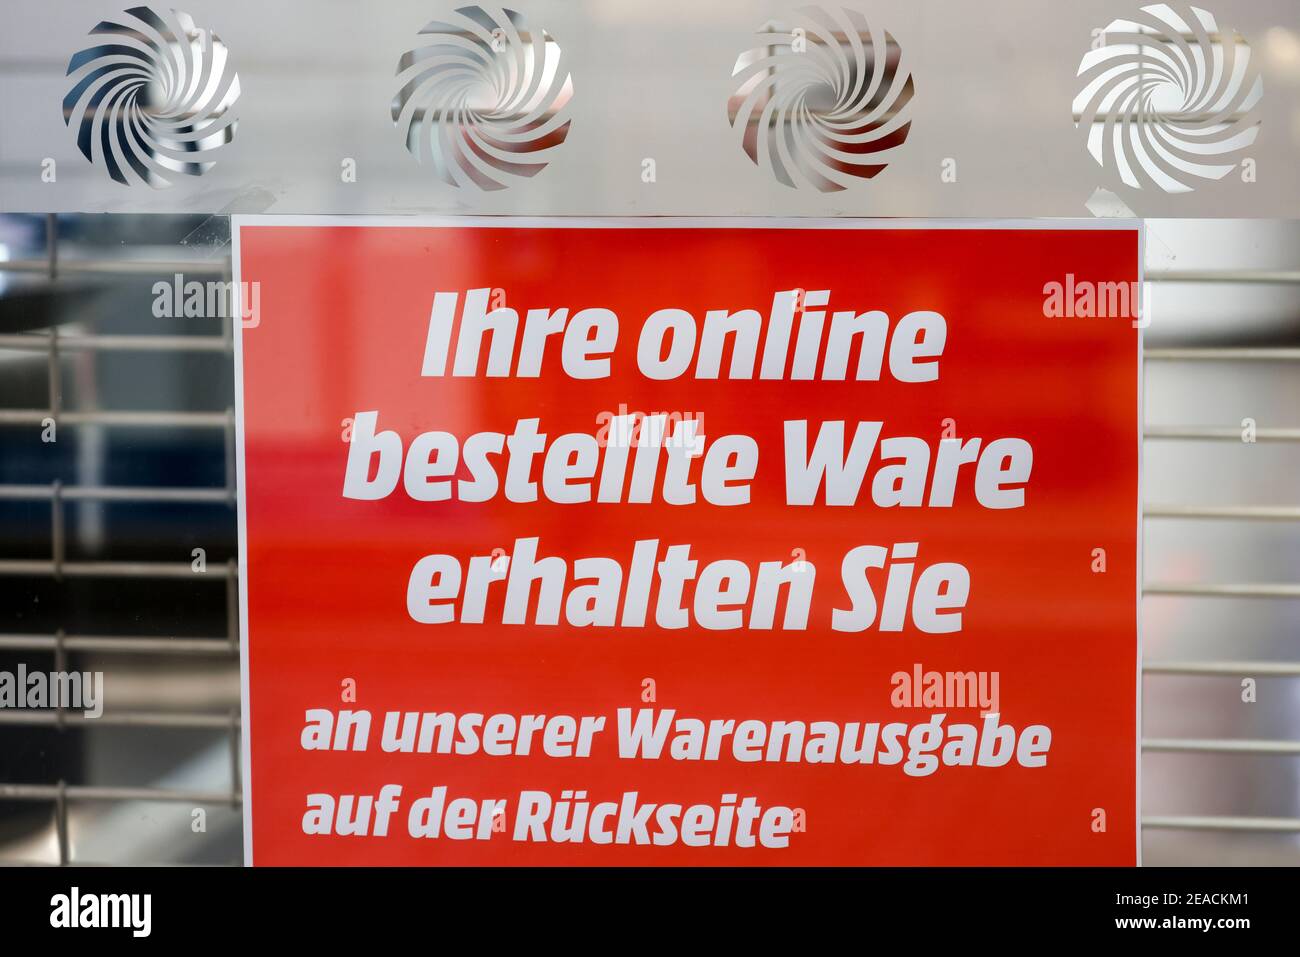 Cologne, North Rhine-Westphalia, Germany - Click and Collect, retail in times of the corona crisis during the second lockdown, the shops are closed, but some offer pick-up stations, MediaMarkt customers can pick up goods ordered online. Stock Photo